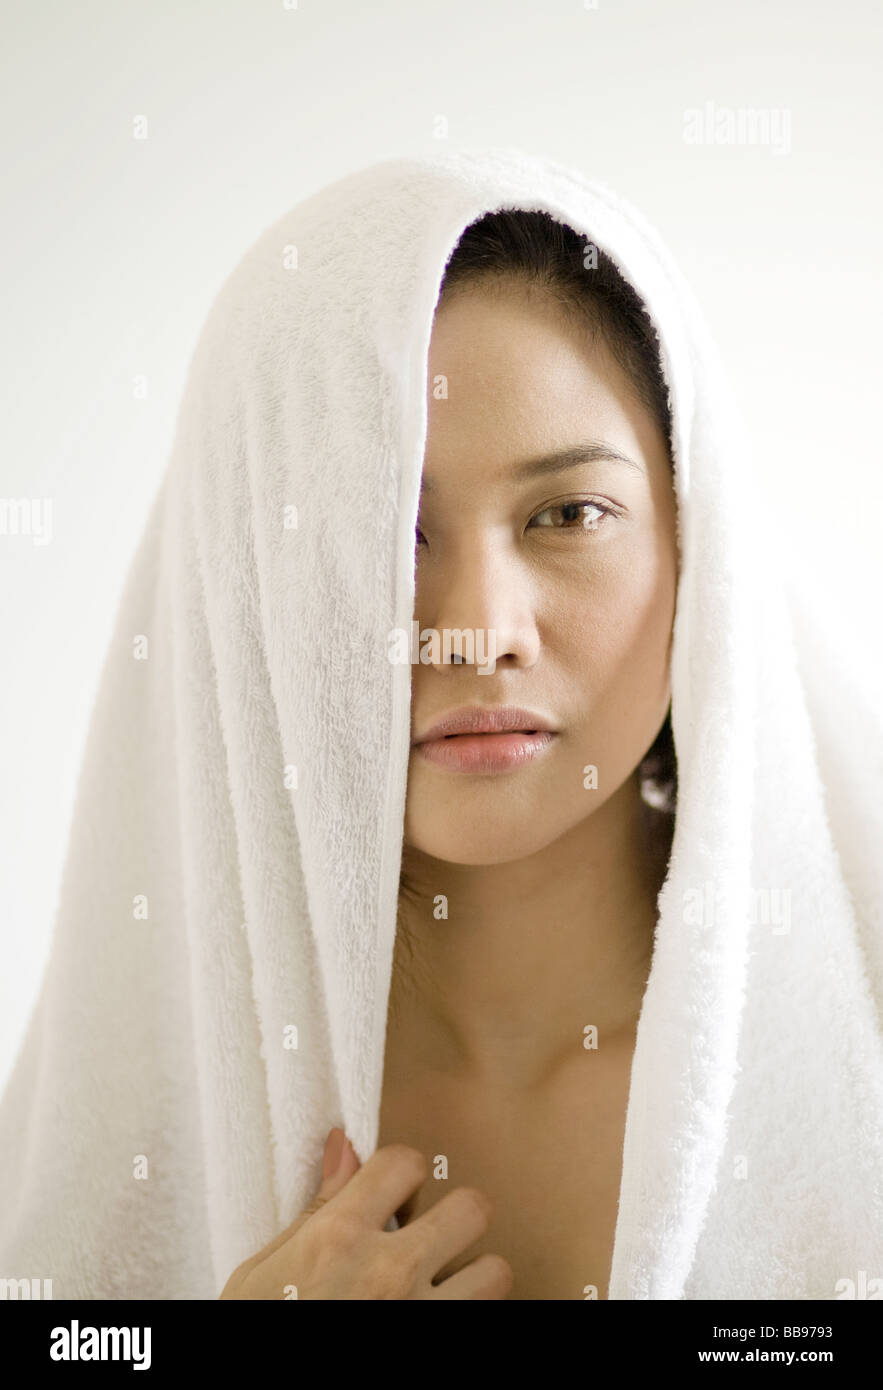 Young Woman After Shower Stock Photo